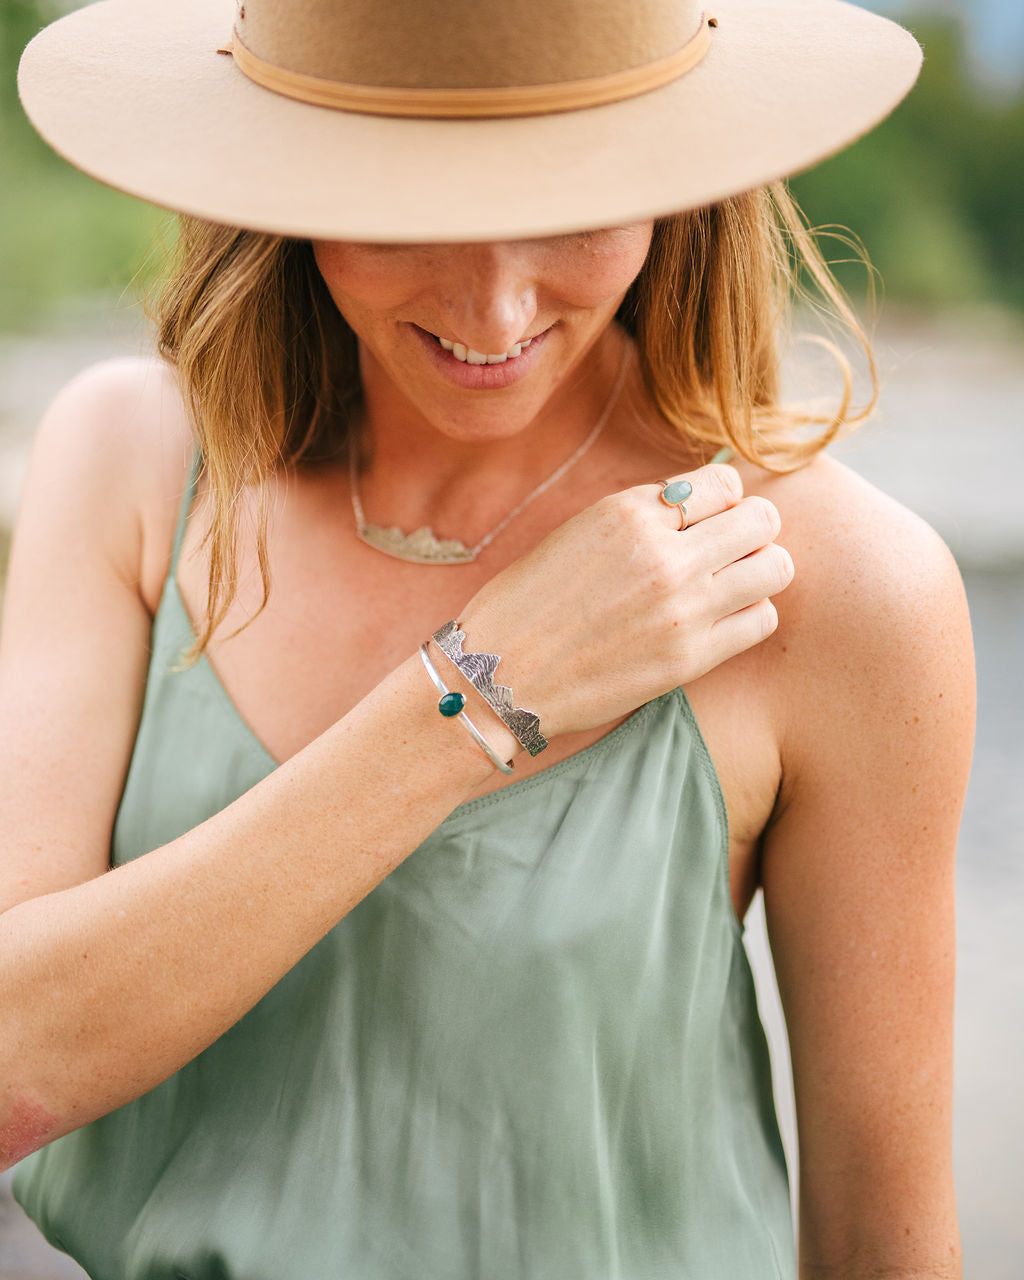 Woman wearing silver mountain cuff bracelet and necklace